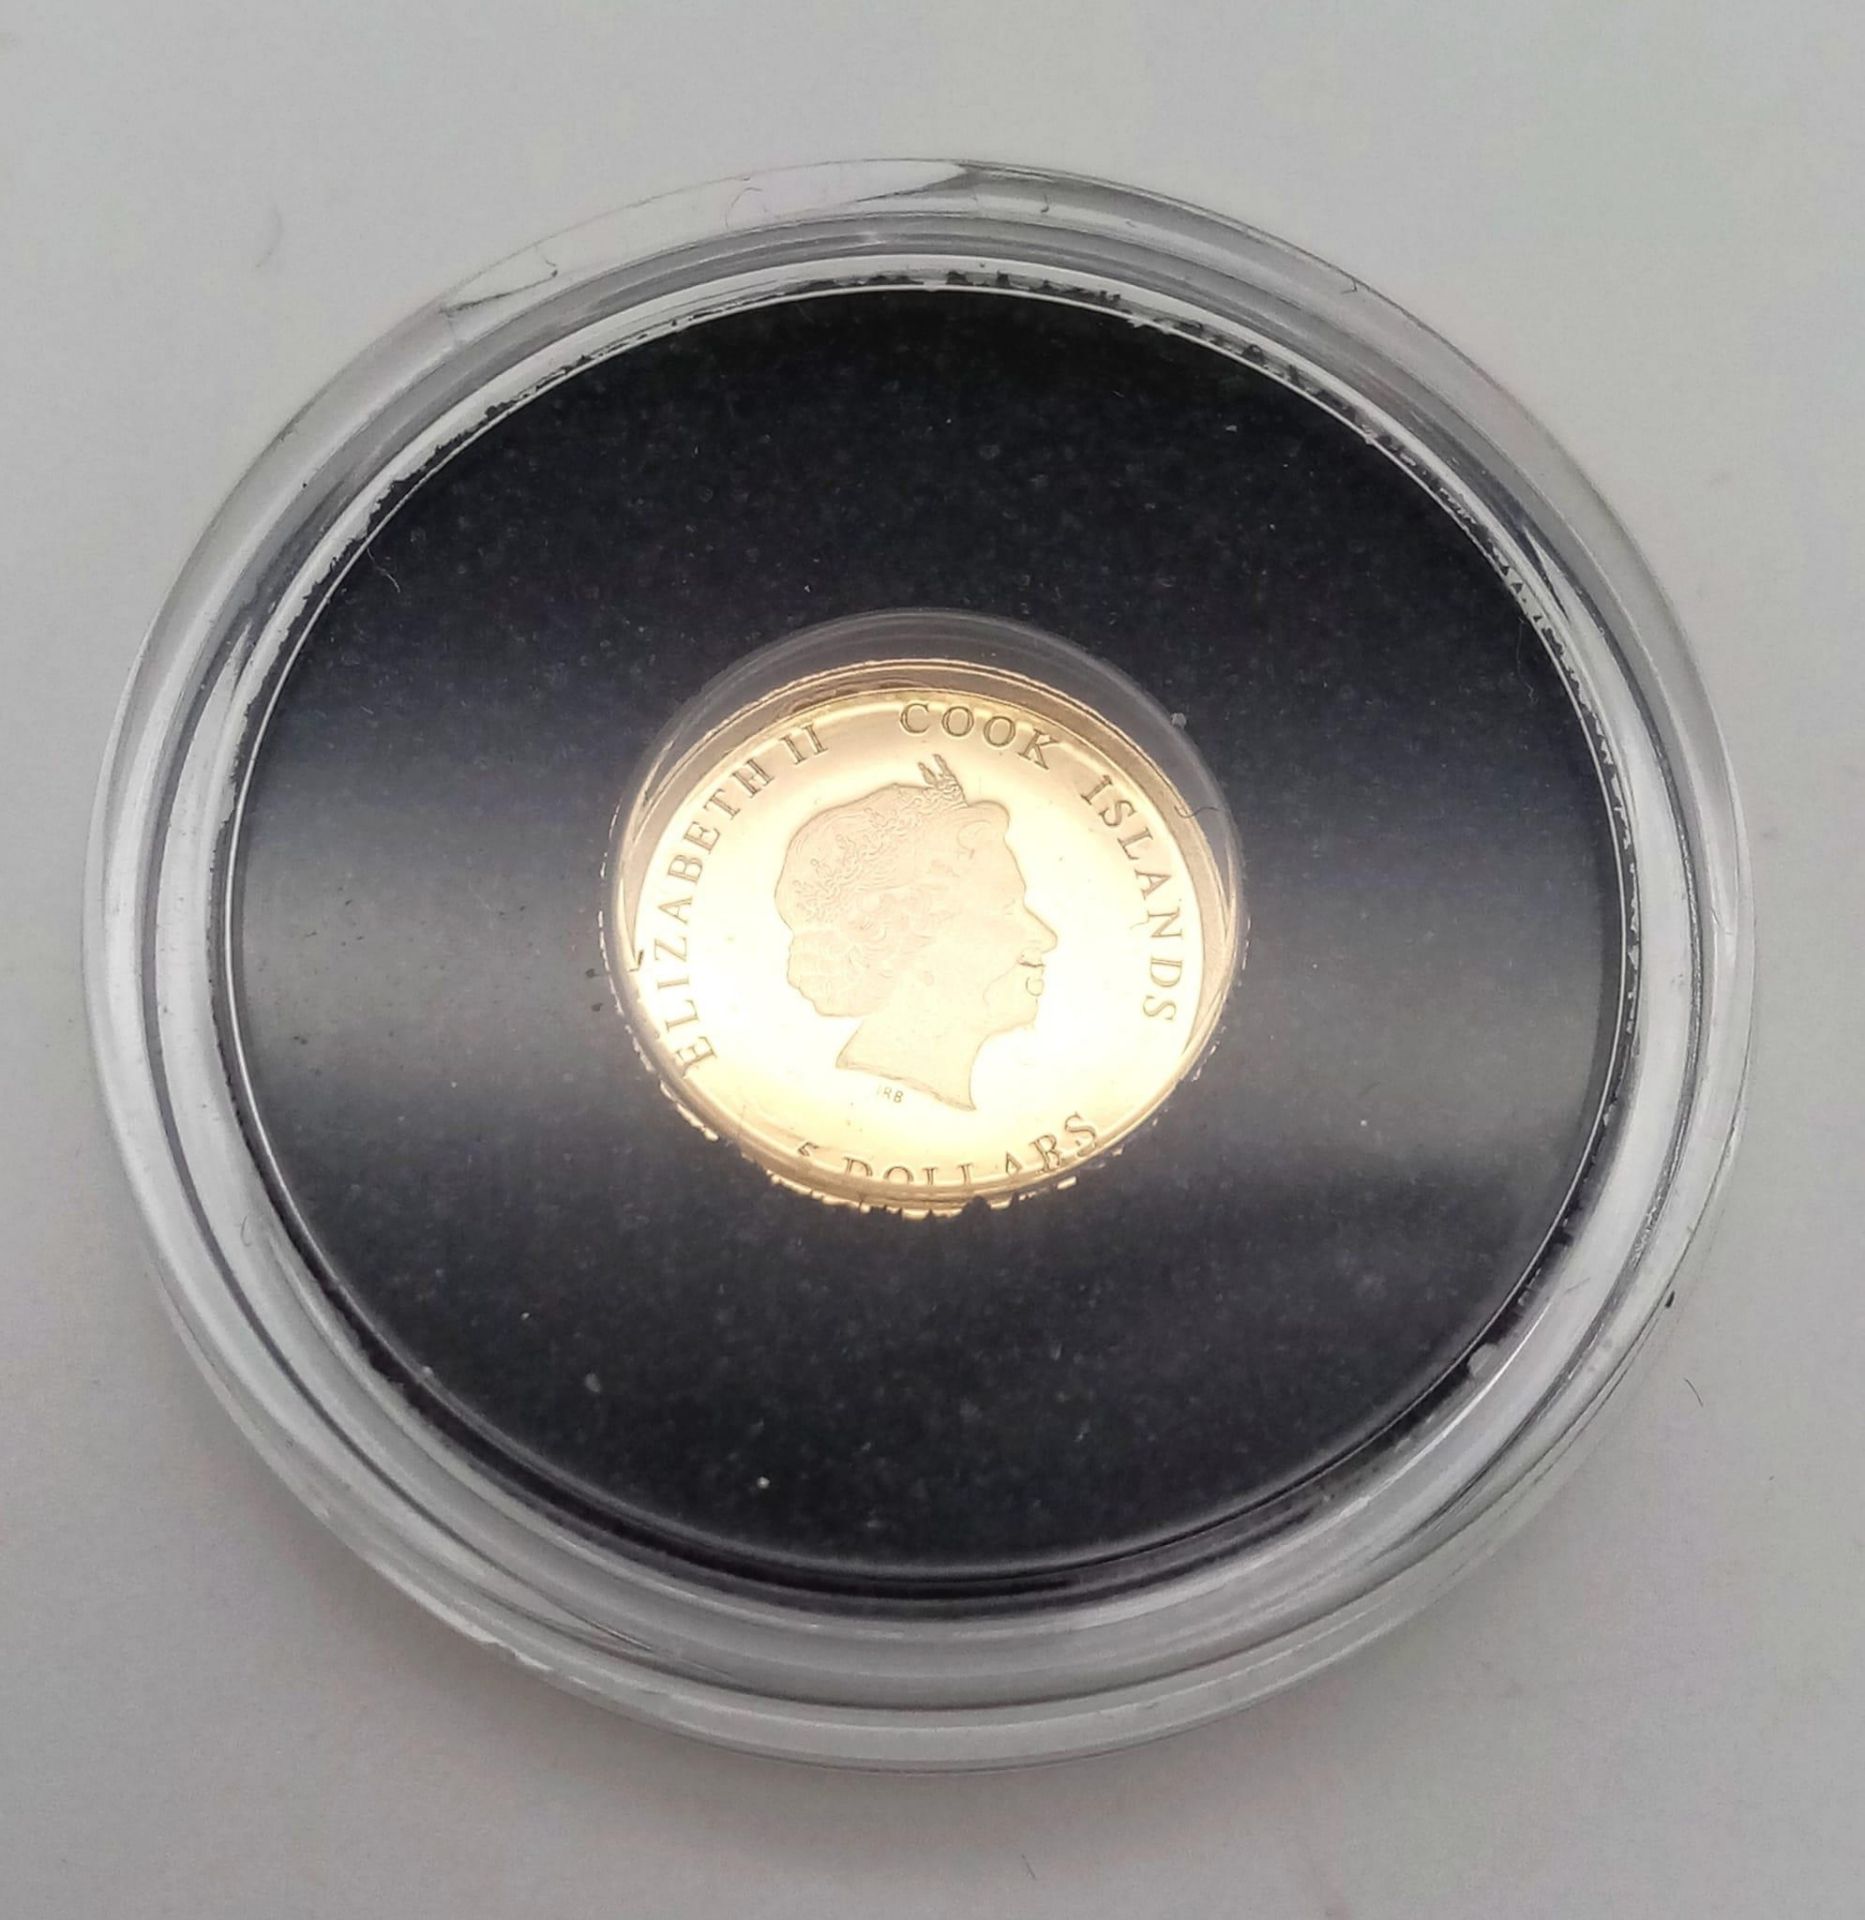 THE WORLDS SMALLEST GOLD COIN , 0.311 OF 24K GOLD PROOF QUALITY $5FROM THE COOK ISLANDS DATED - Image 2 of 3